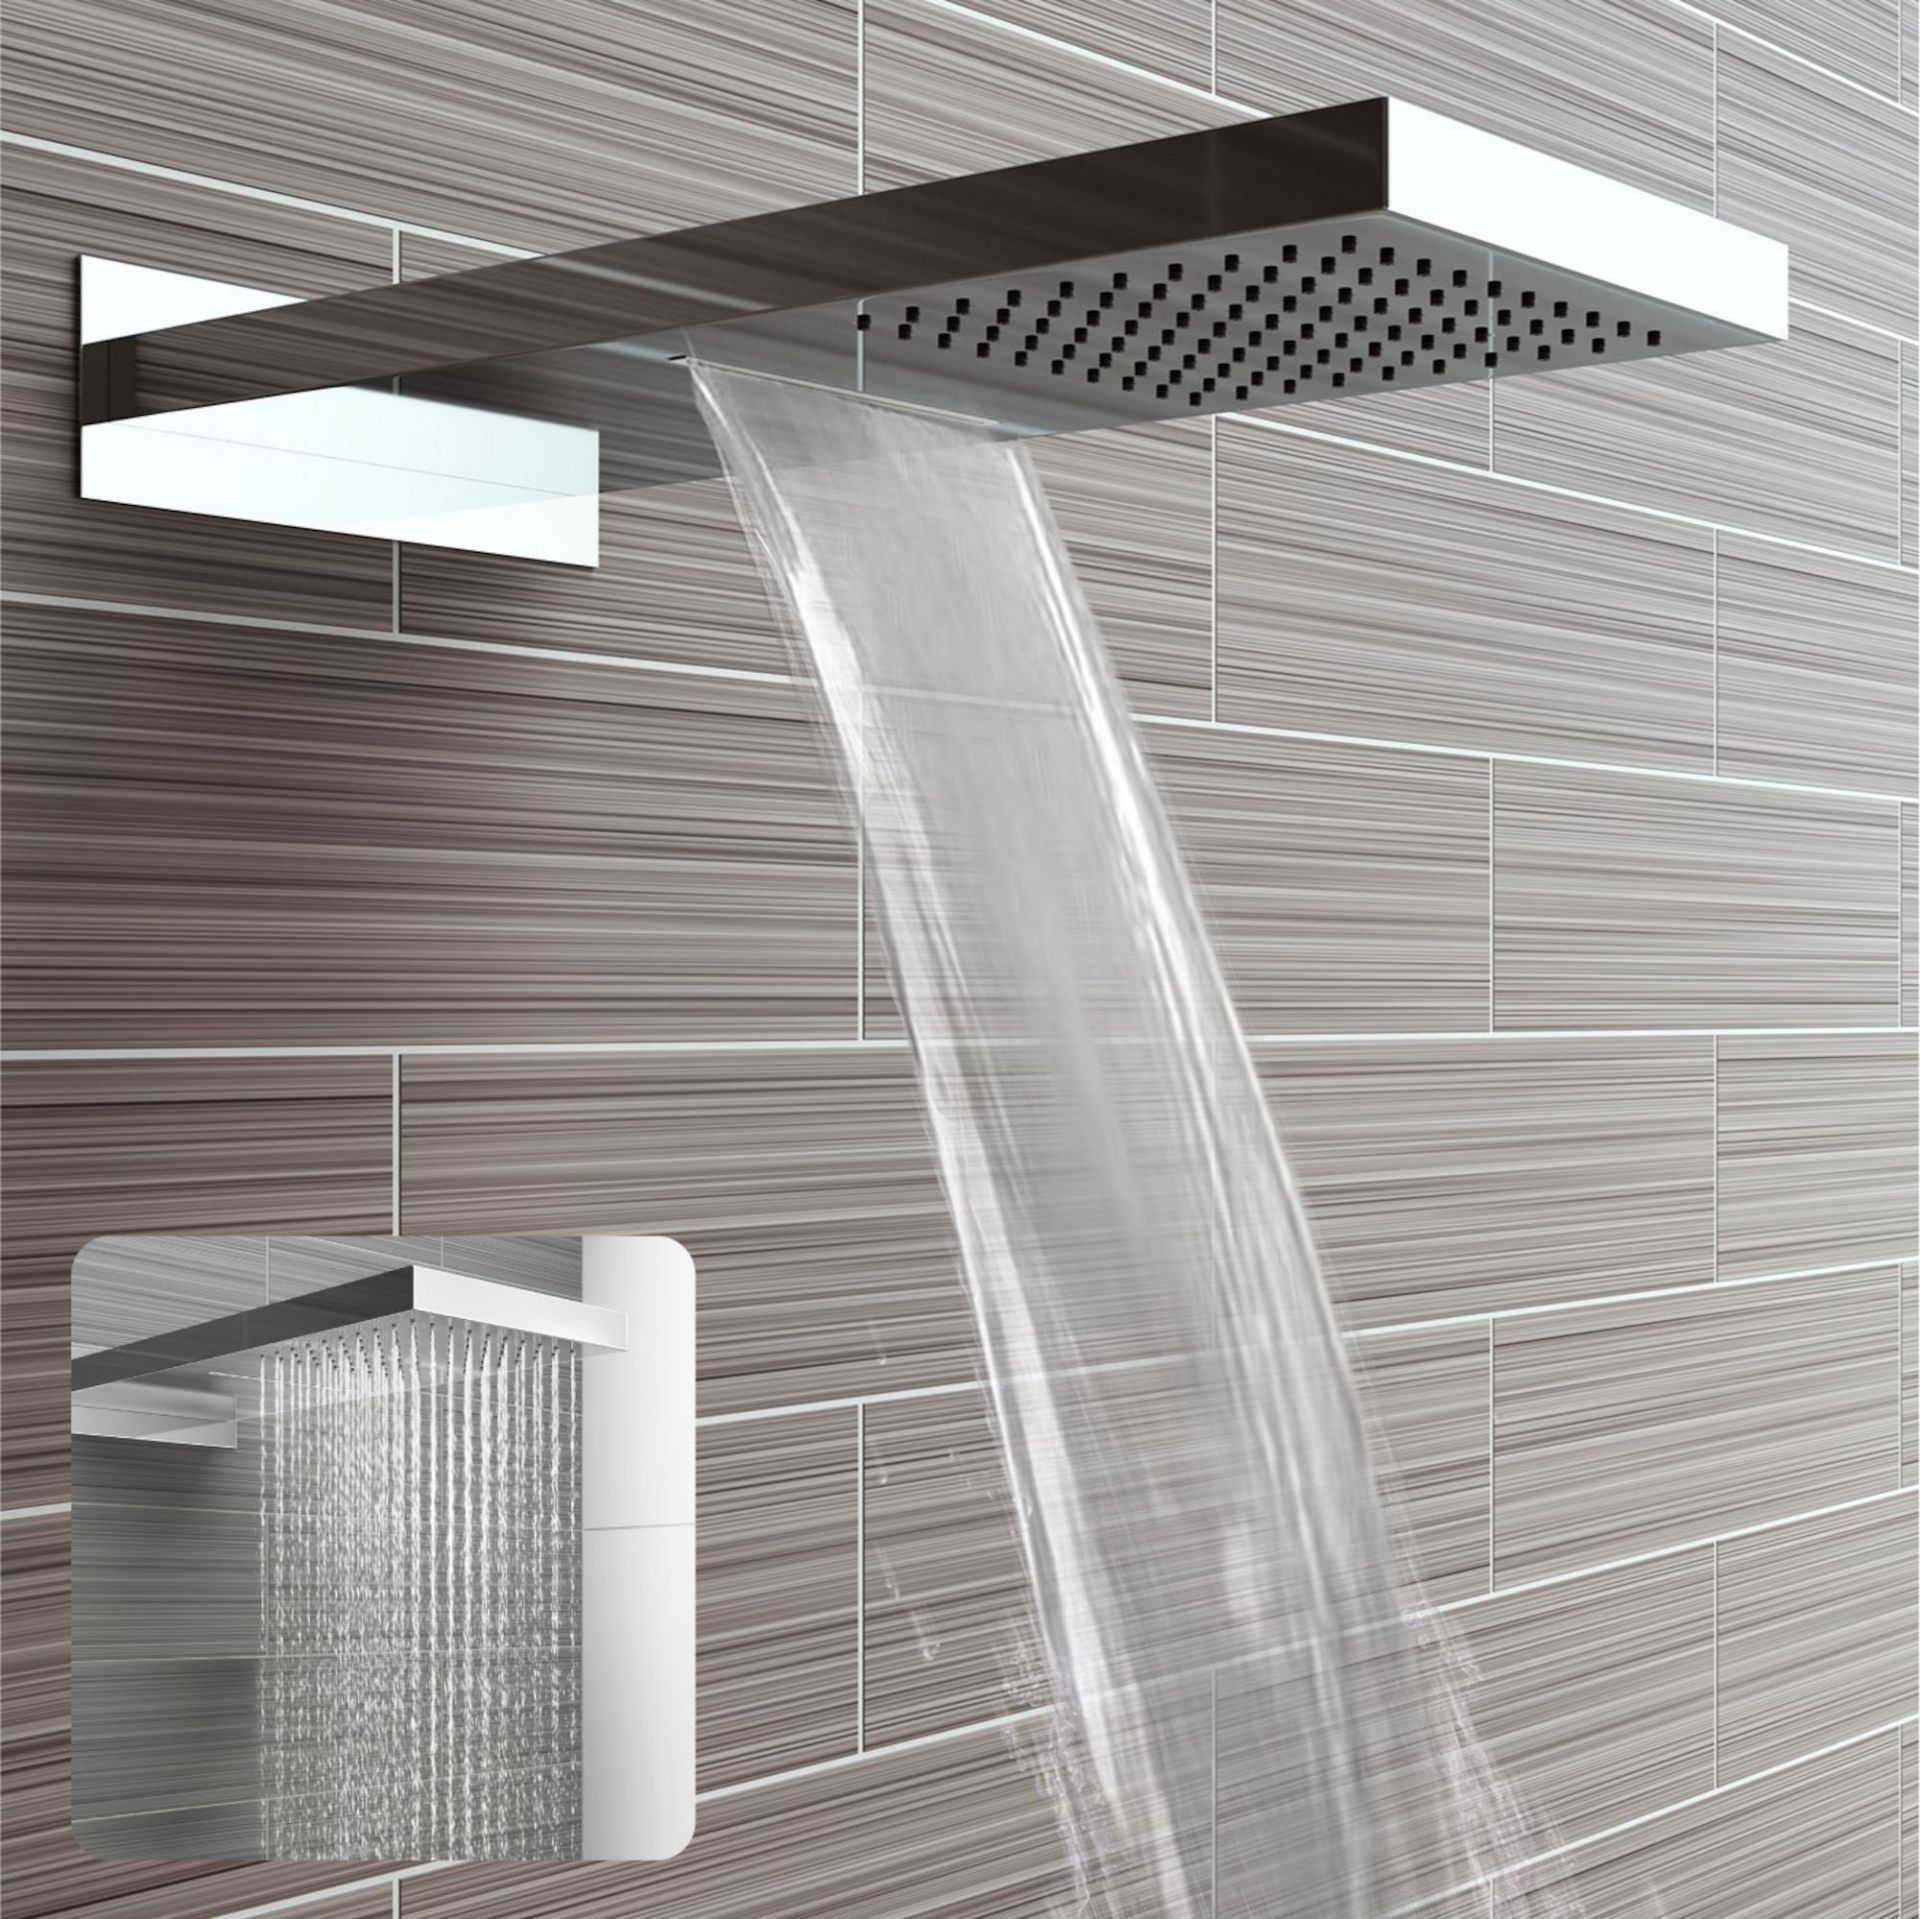 (XM47) Stainless Steel 230x500mm Waterfall Shower Head. RRP £374.99. Dual function waterfall and - Image 2 of 5